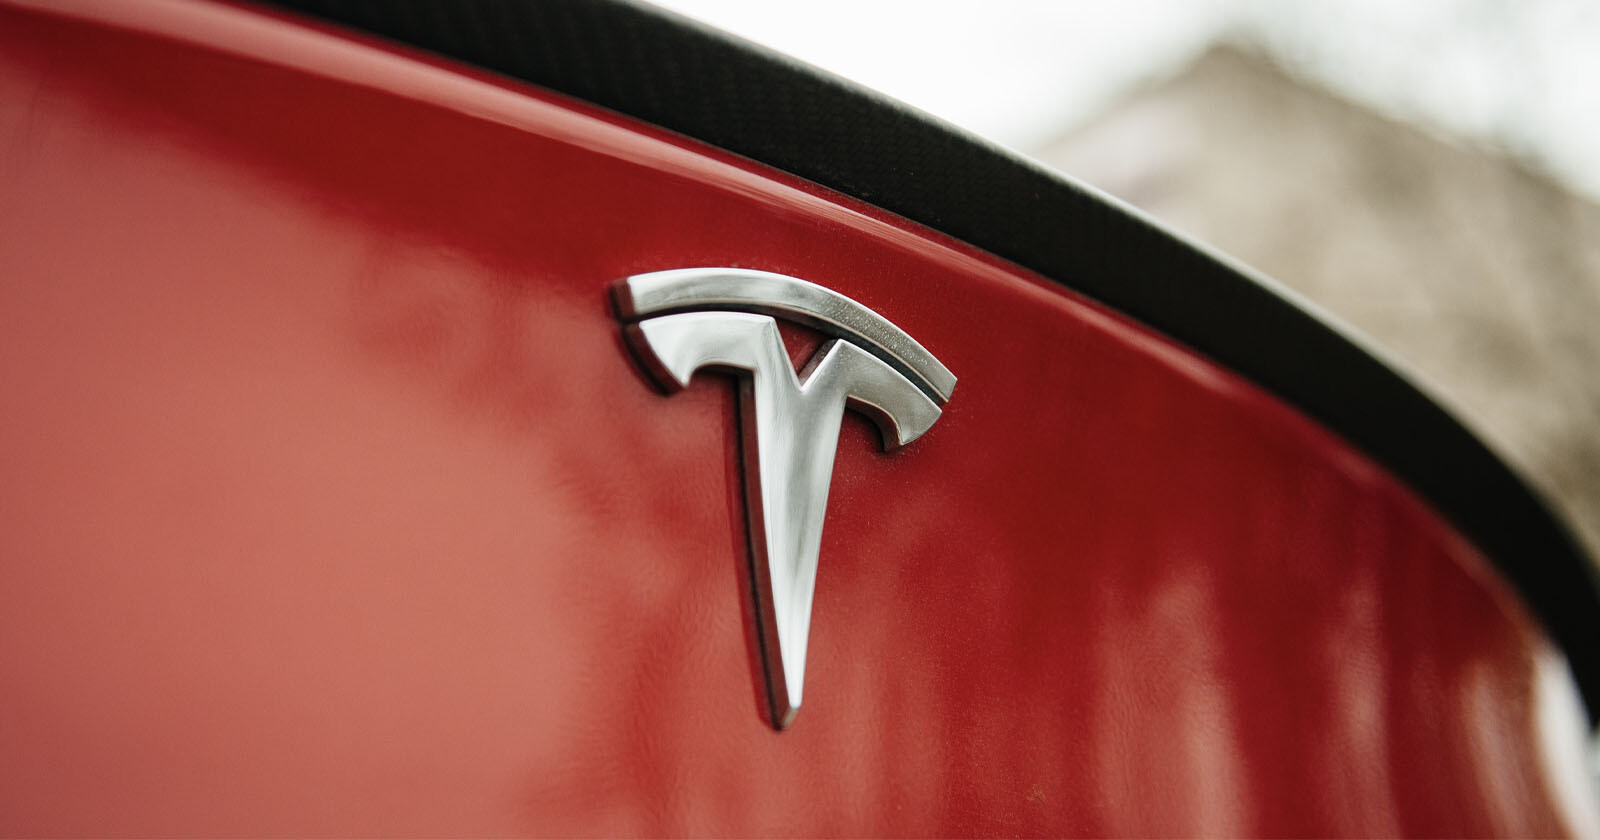  tesla sued over report employees shared private car 